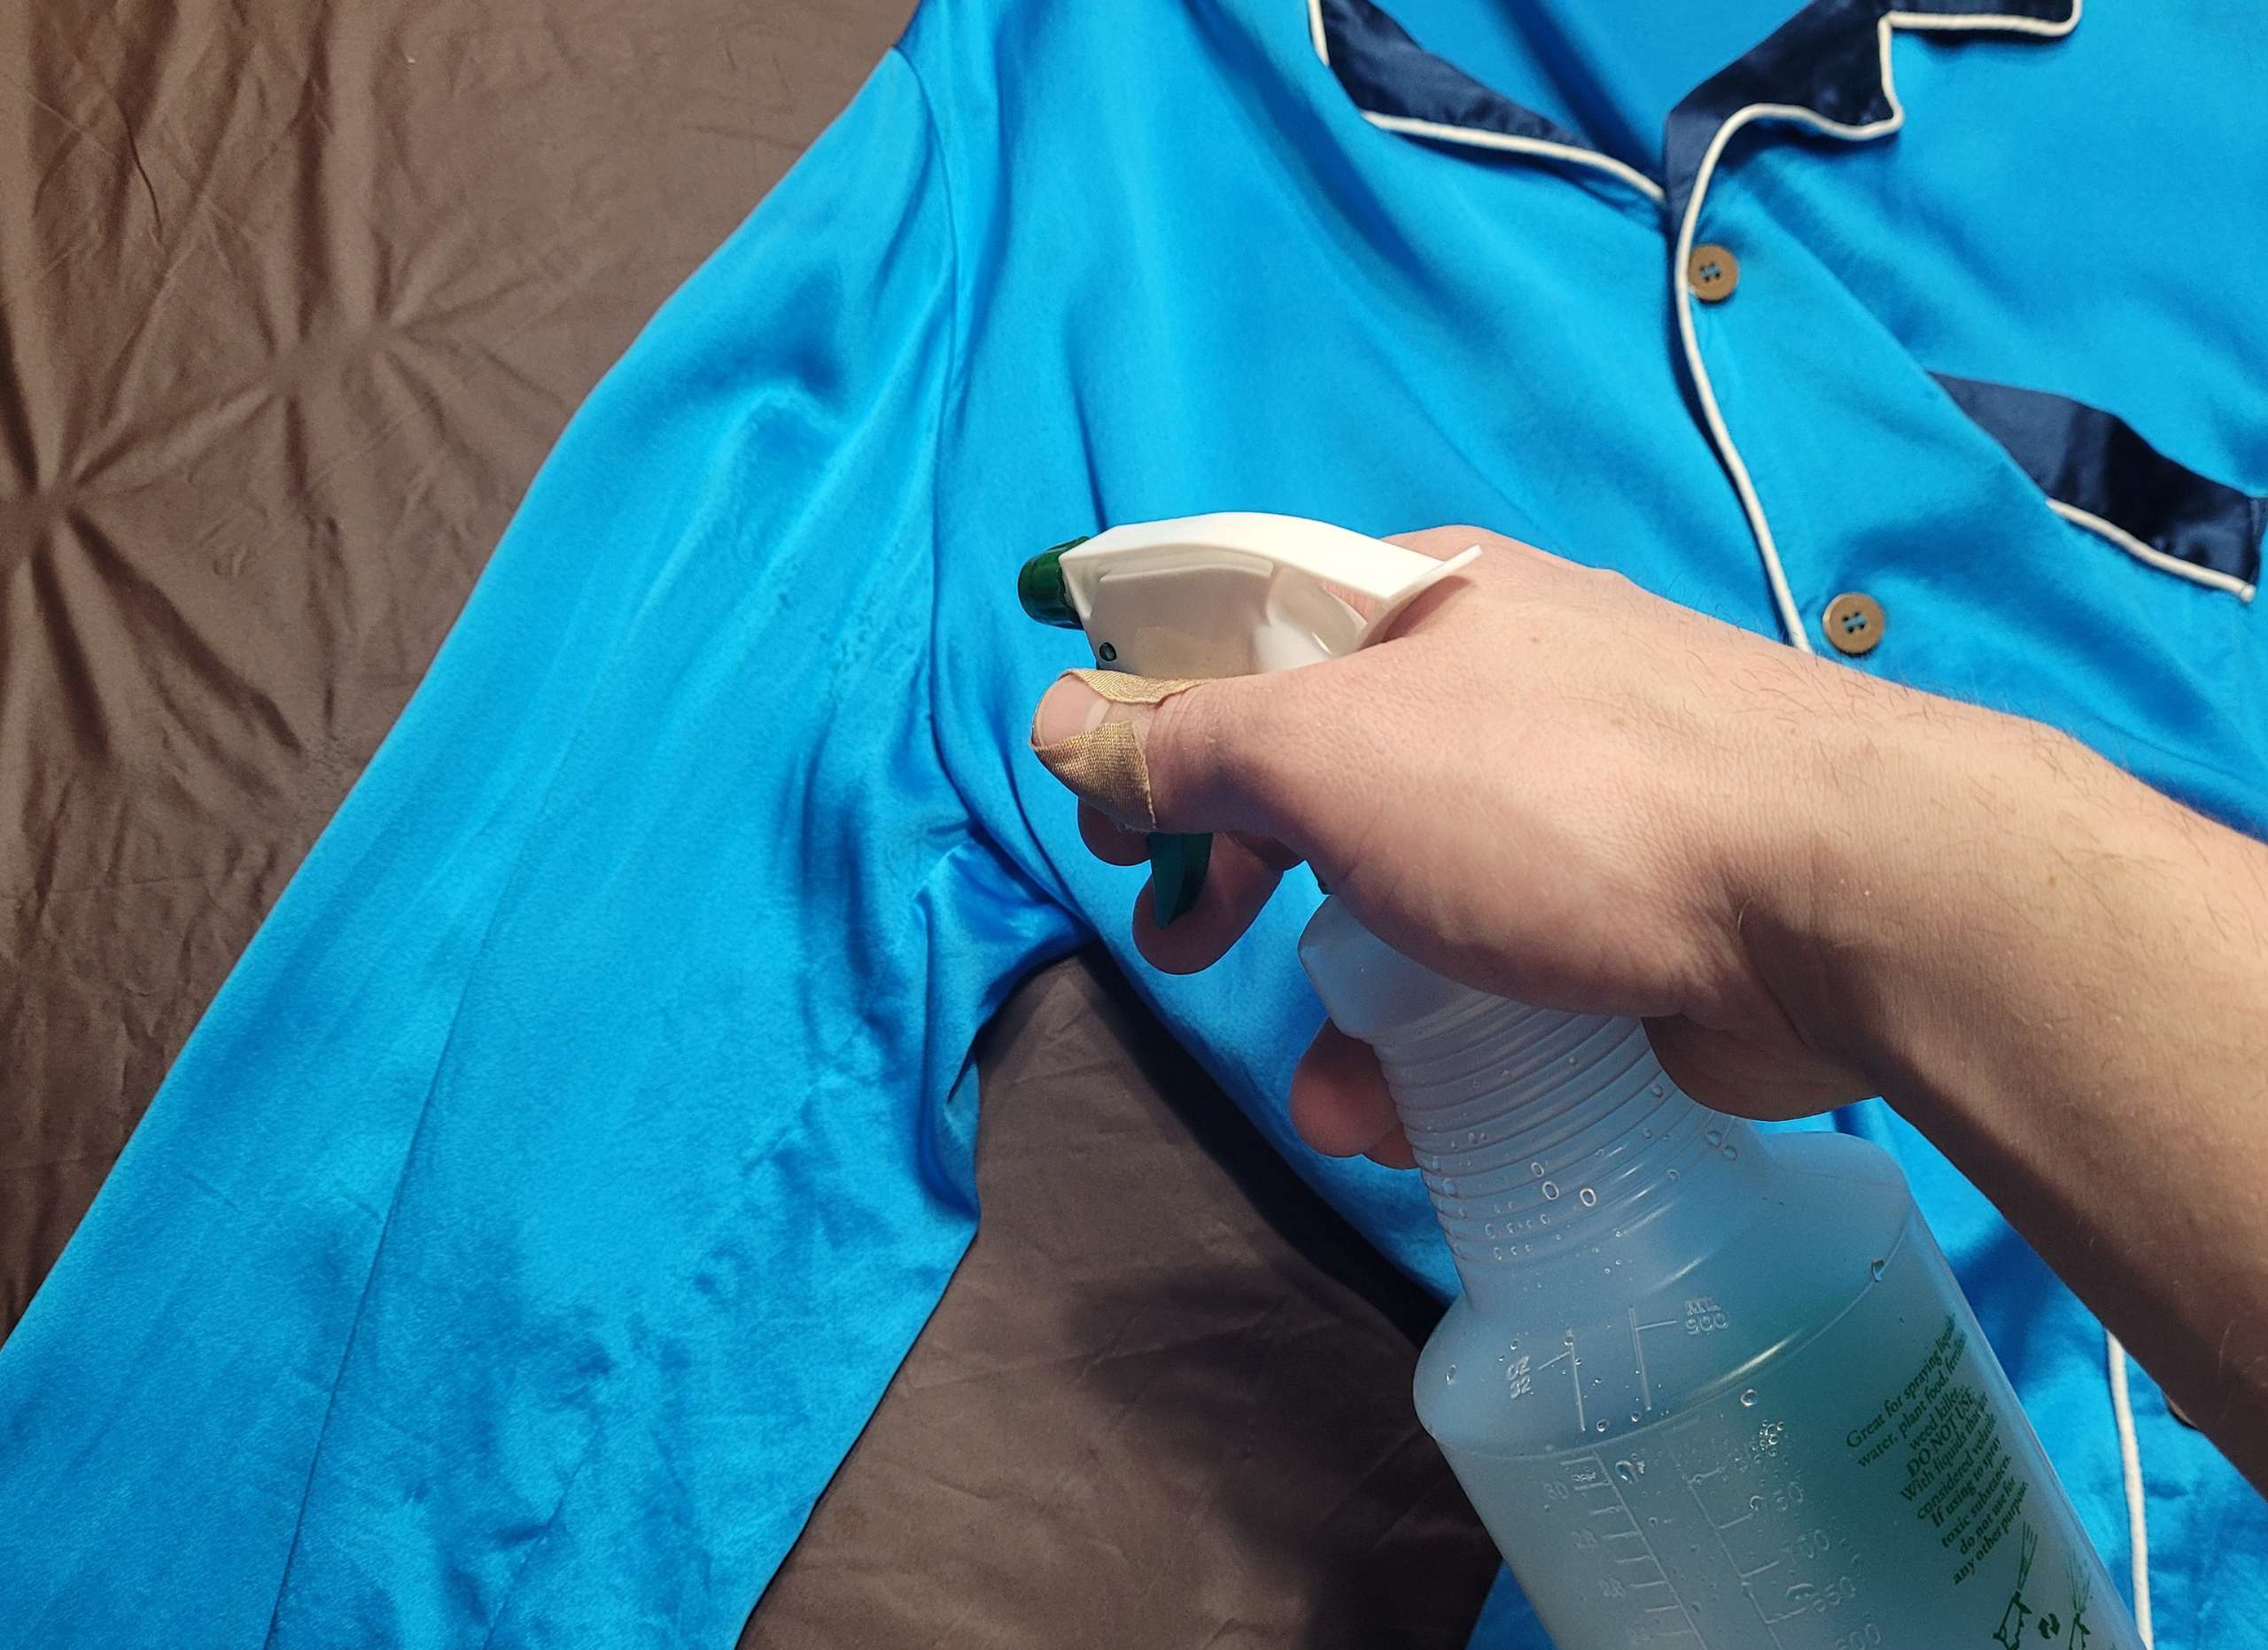 photo of silk pajamas being sprayed with a cleaning solution to remove sweat stains